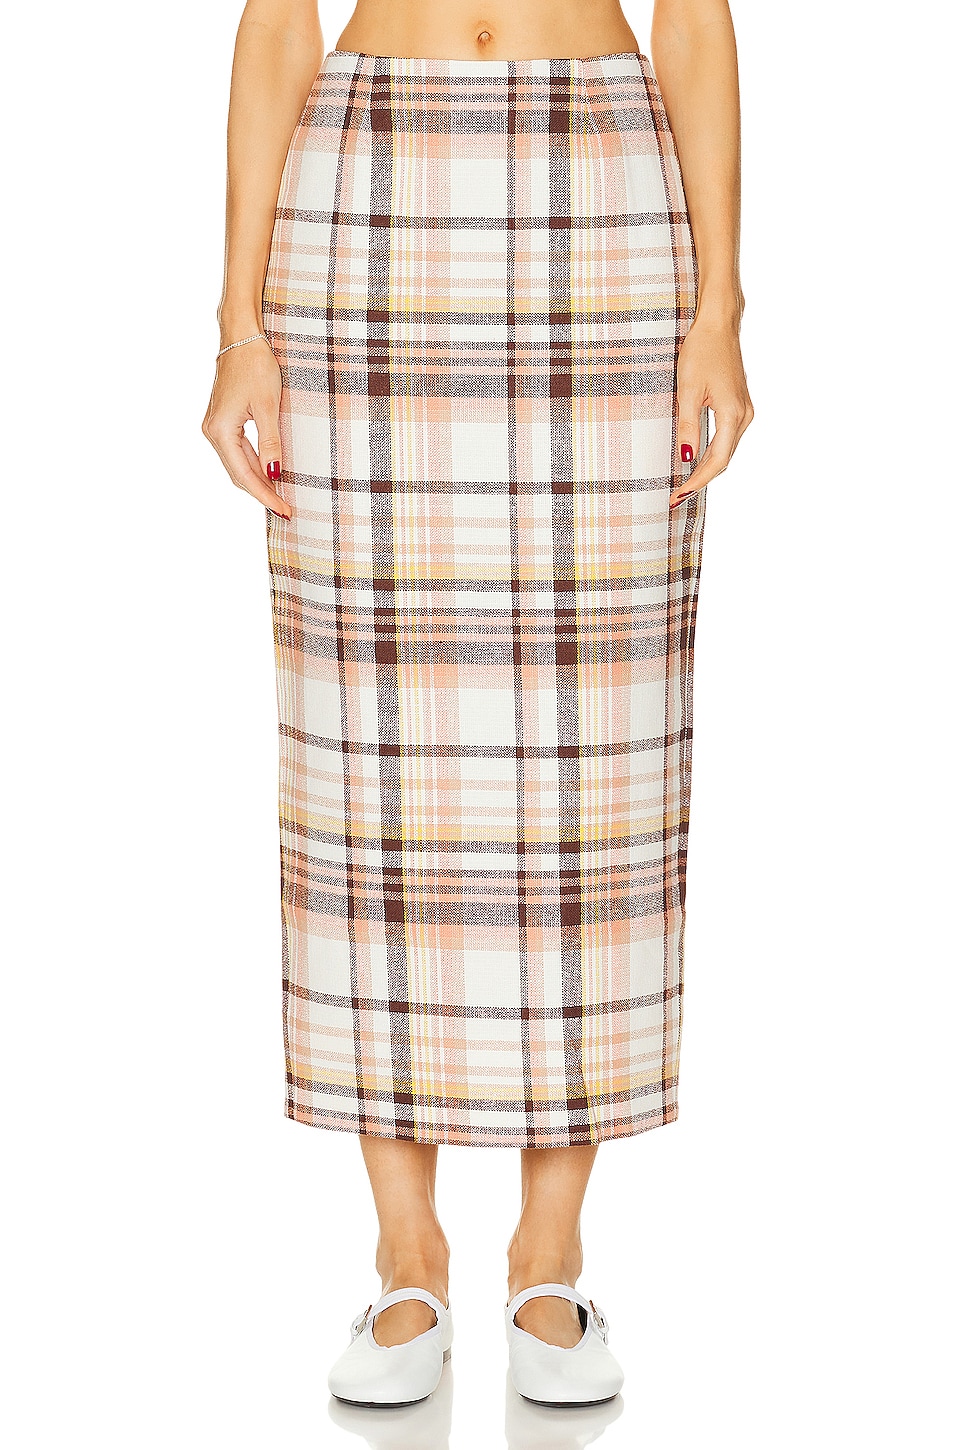 Image 1 of Zimmermann Matchmaker Check Pencil Skirt in Cream Check